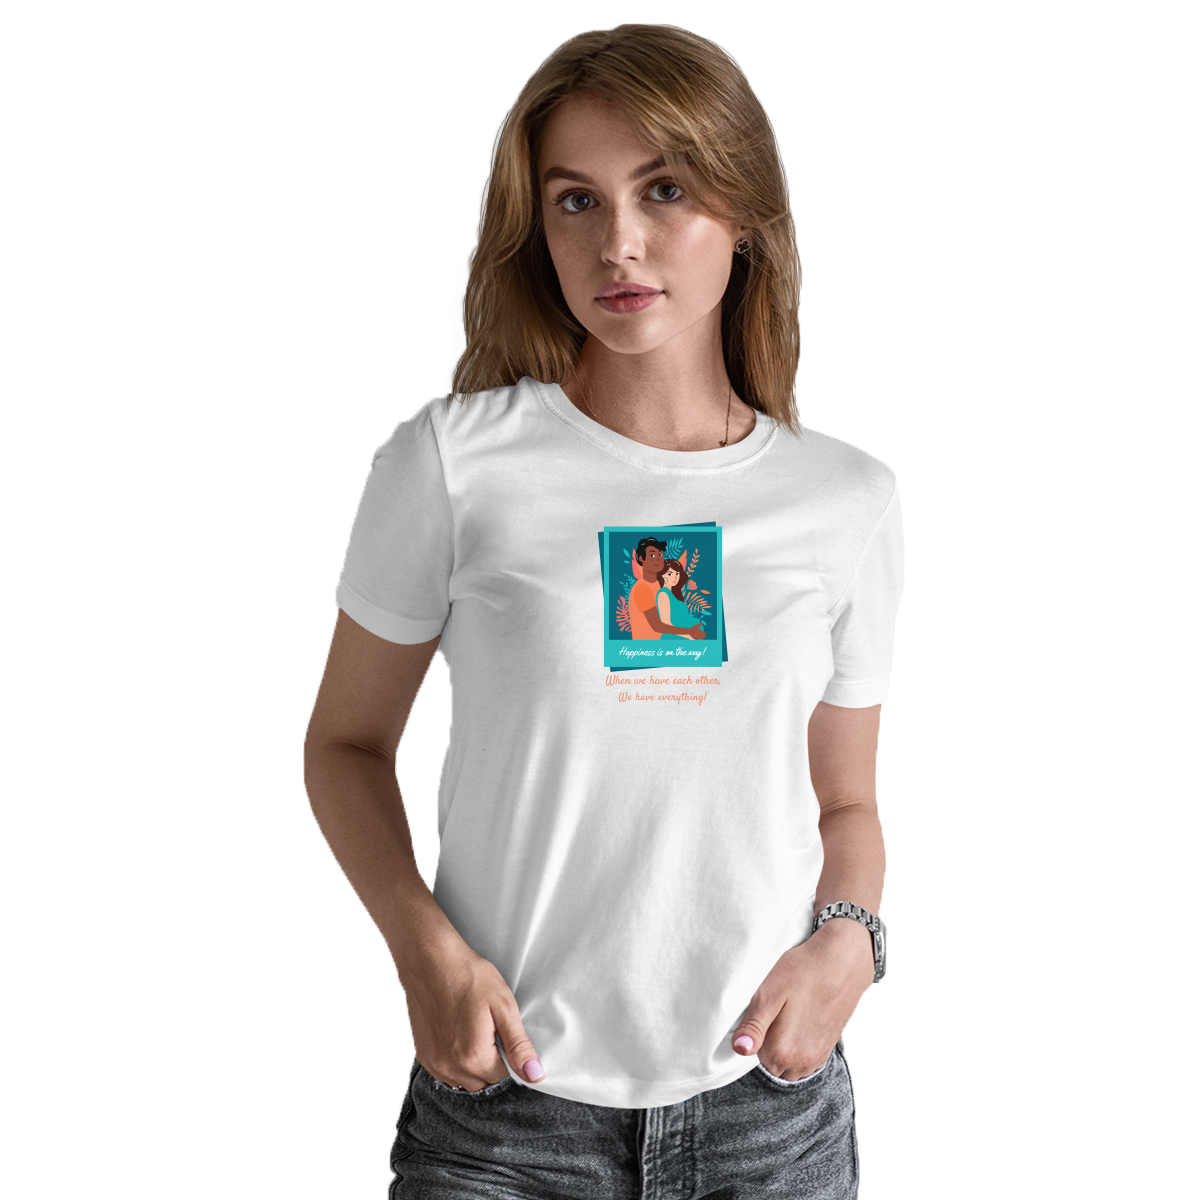 Happiness is on the way Women's T-shirt | White